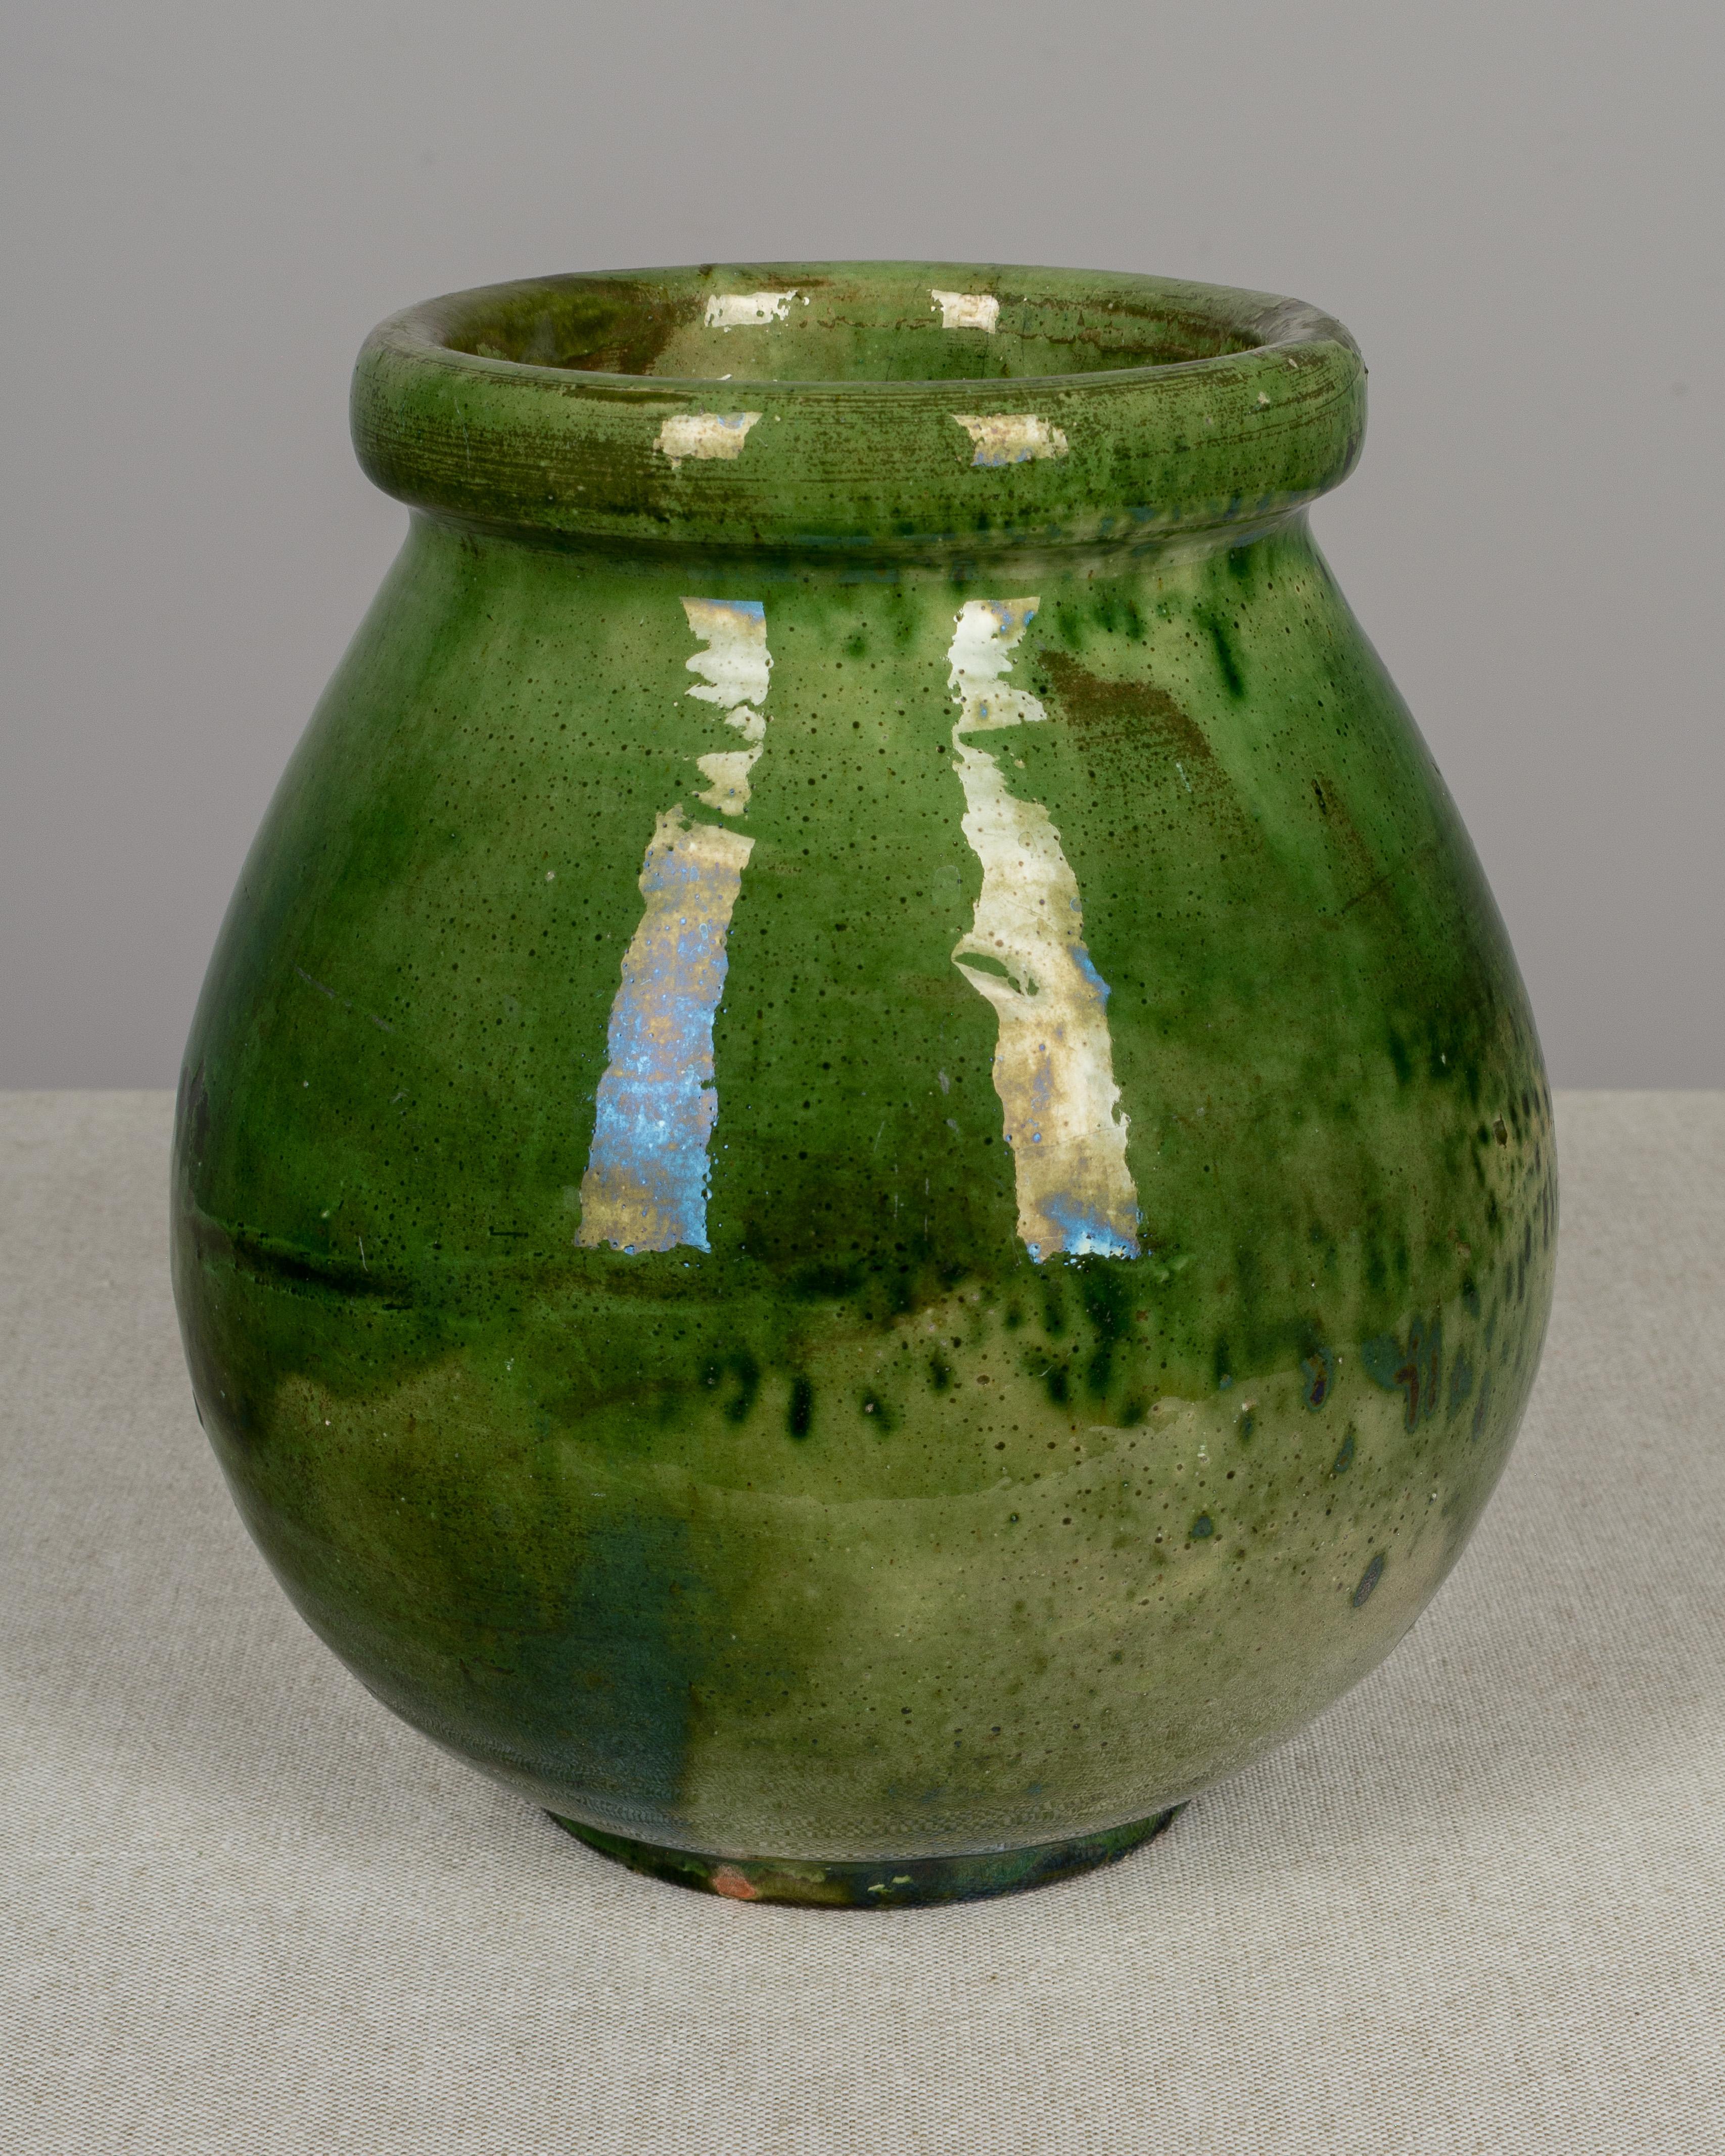 An earthenware pottery vase from the Southwest of France with traditional green glaze. We have a large collection of French pottery. Please see other listings. These ordinary earthenware vessels were once used daily in the French country home and